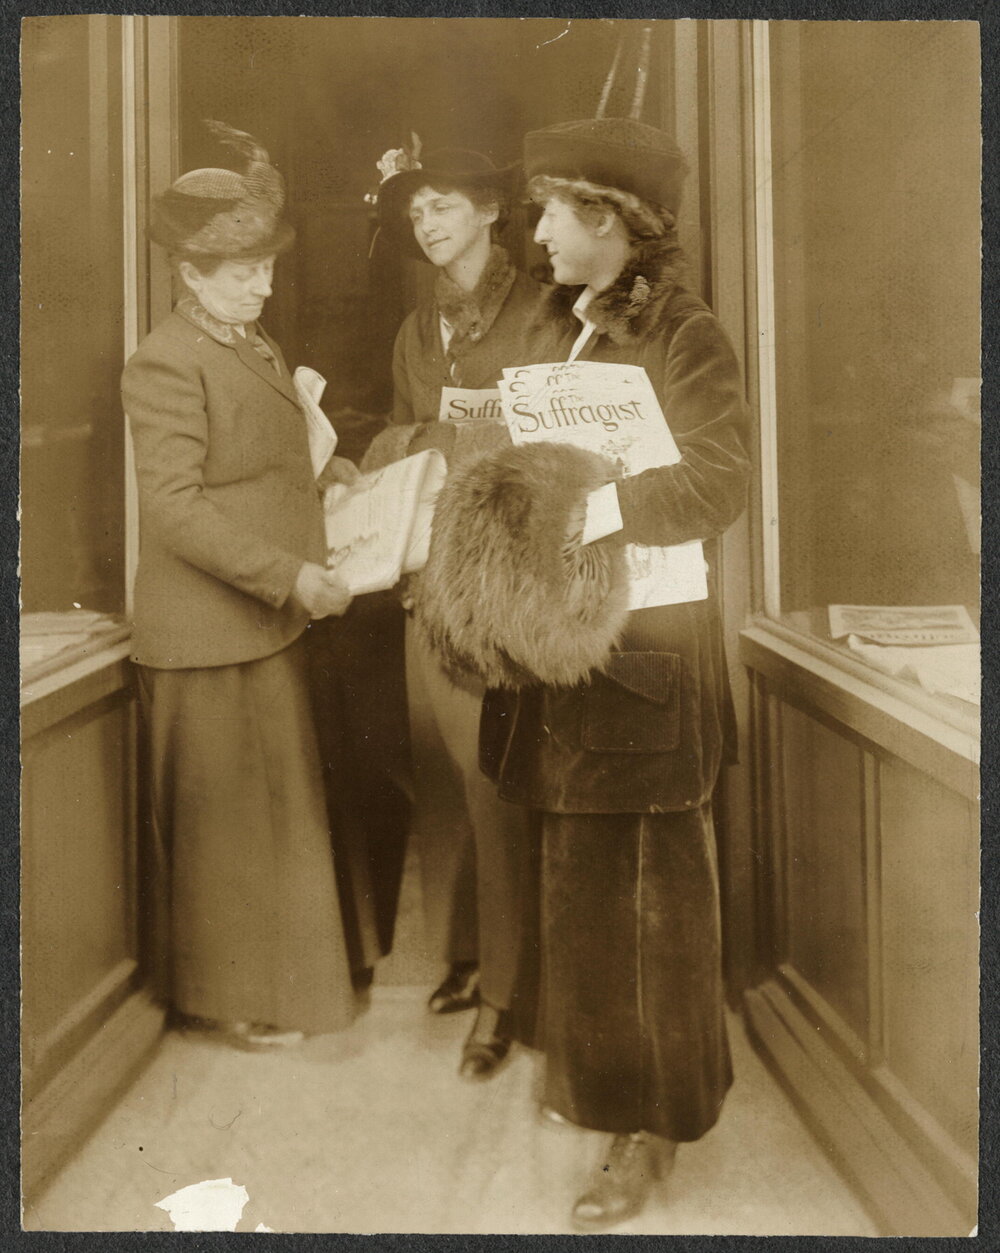  Rep. Jeanette Rankin of Montana (right) holding The Suffragist   newspaper  (    Library of Congress    )  